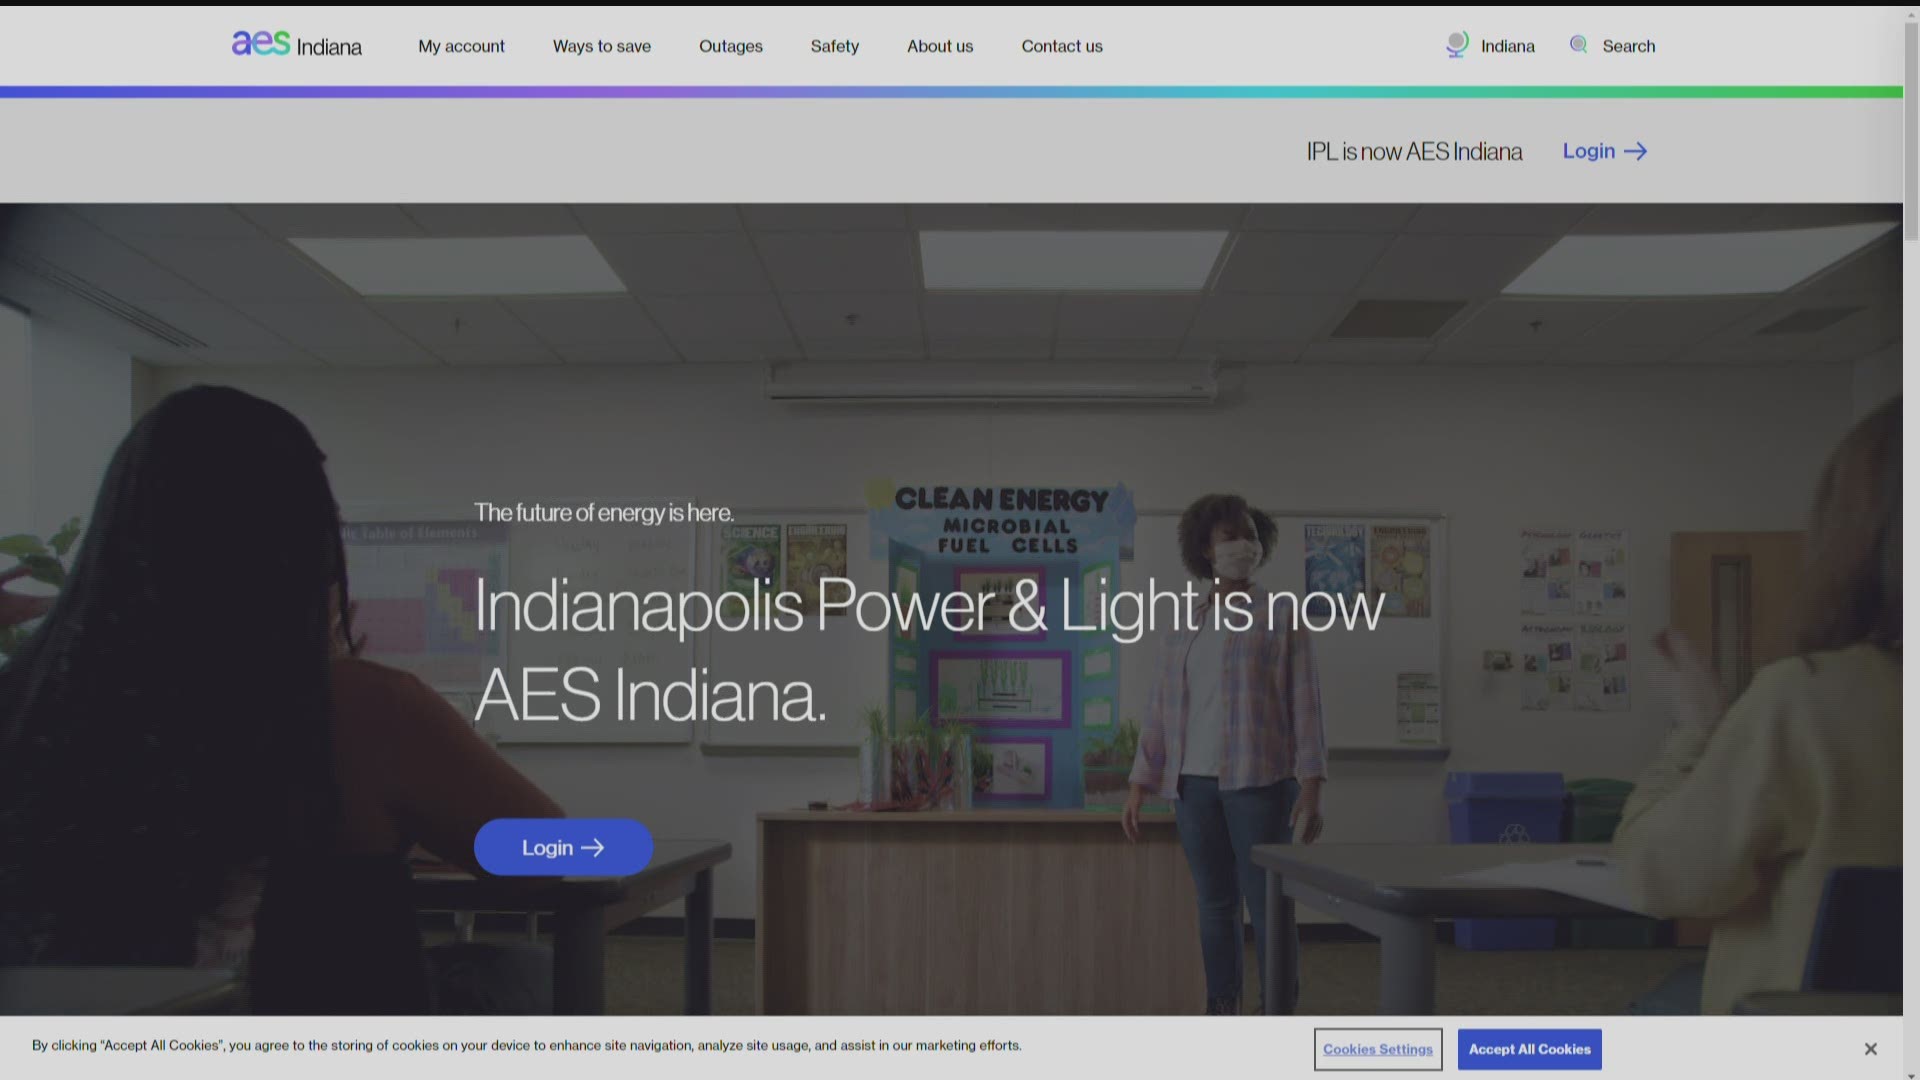 According to AES Indiana's Facebook page, AES acquired Indianapolis Power & Light Company in 2001.